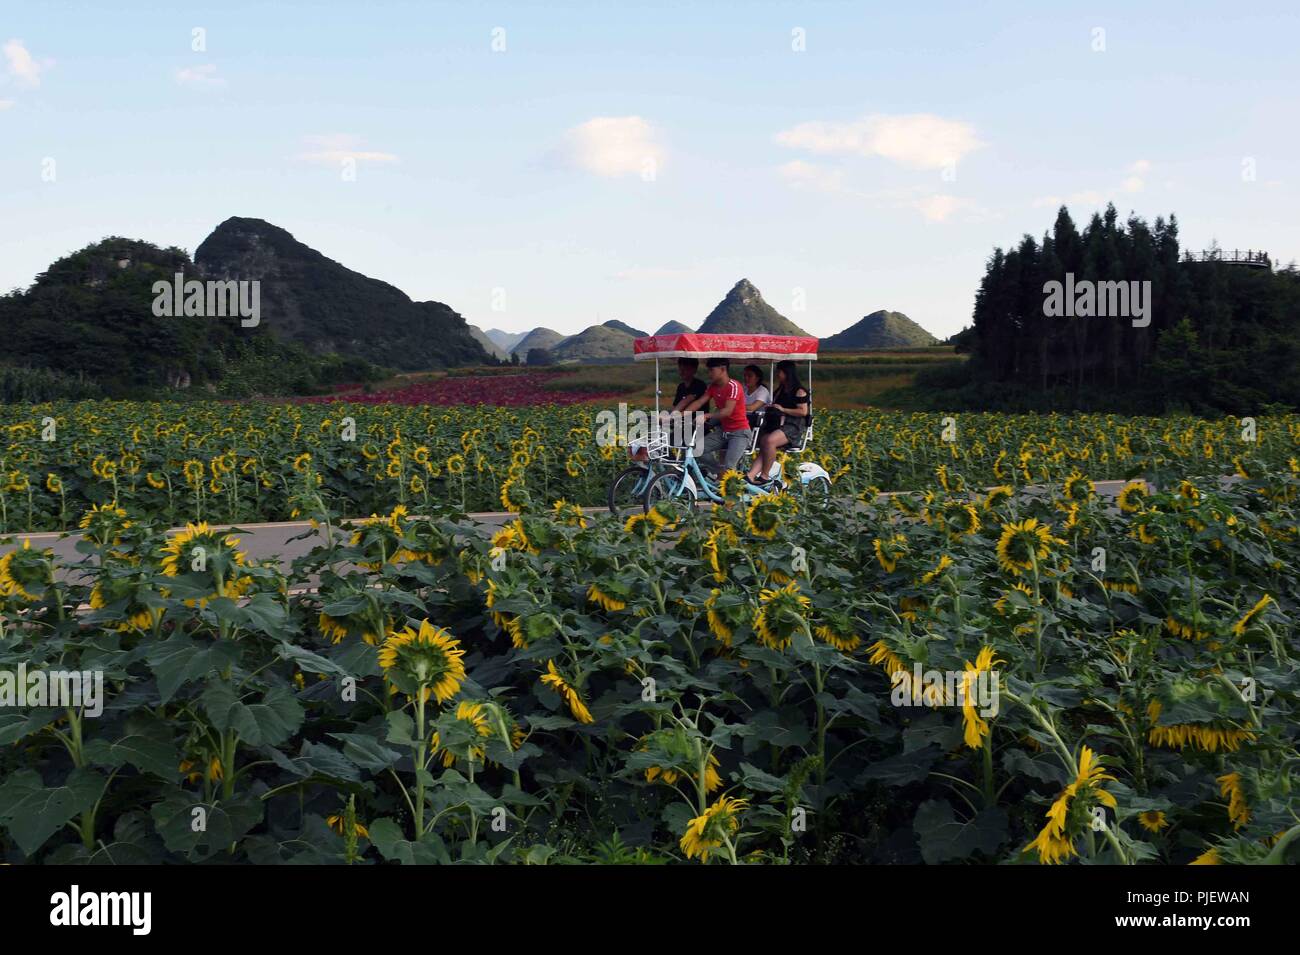 Luoping, China's Yunnan Province. 5th Sep, 2018. Visitors tour round colorful flower fields in Luoping County, southwest China's Yunnan Province, Sept. 5, 2018. Colorful flower fields of 200 hectares are created by the local government in Luoping County to boost tourism development. Credit: Yang Zongyou/Xinhua/Alamy Live News Stock Photo